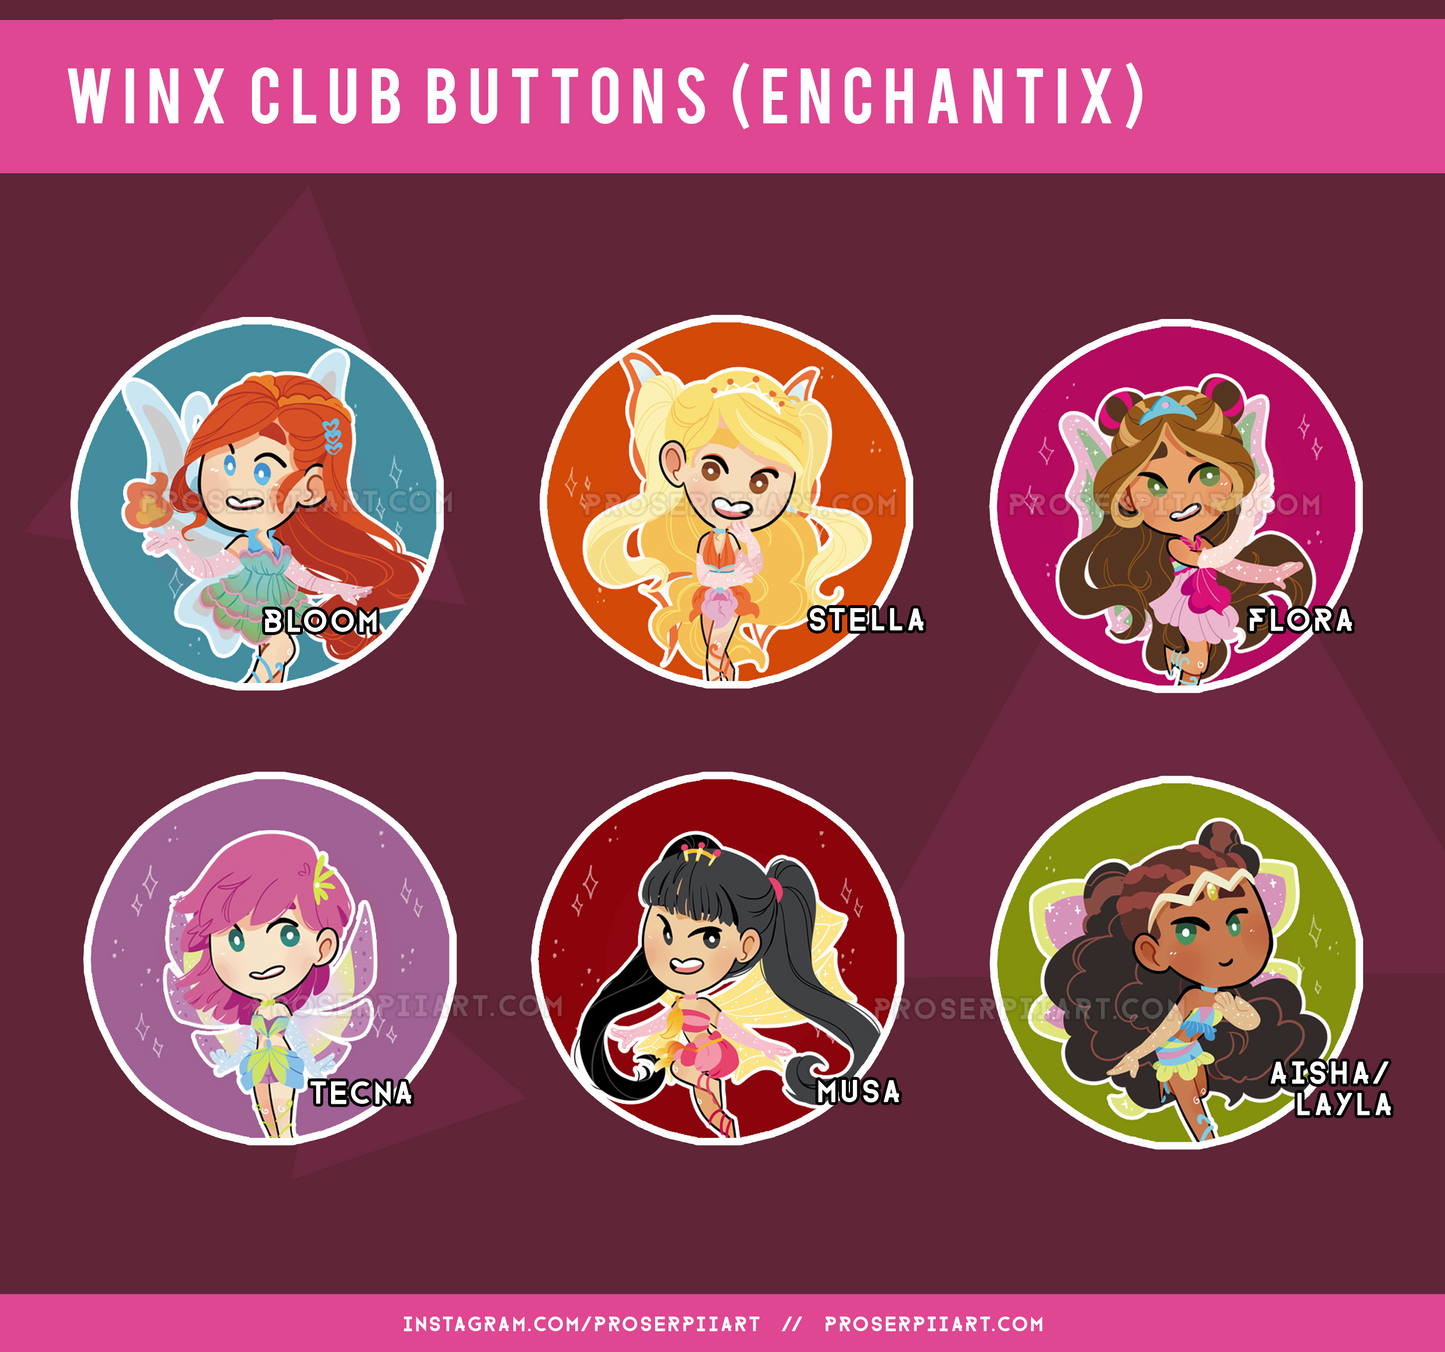 Winx Club Buttons!